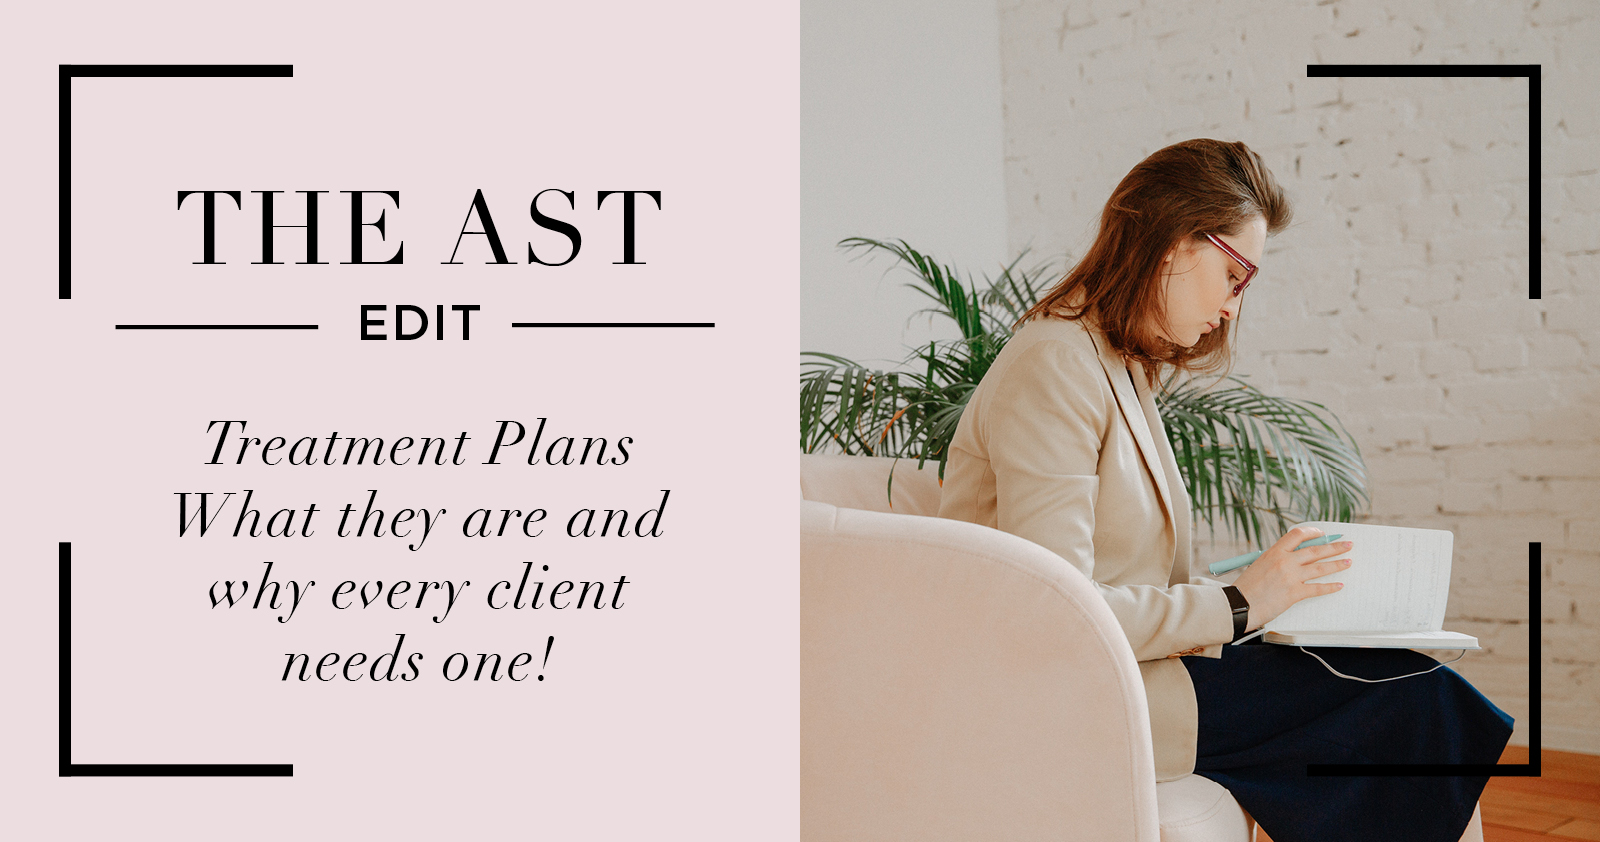 Treatment Plans - What they are and why every client needs one!